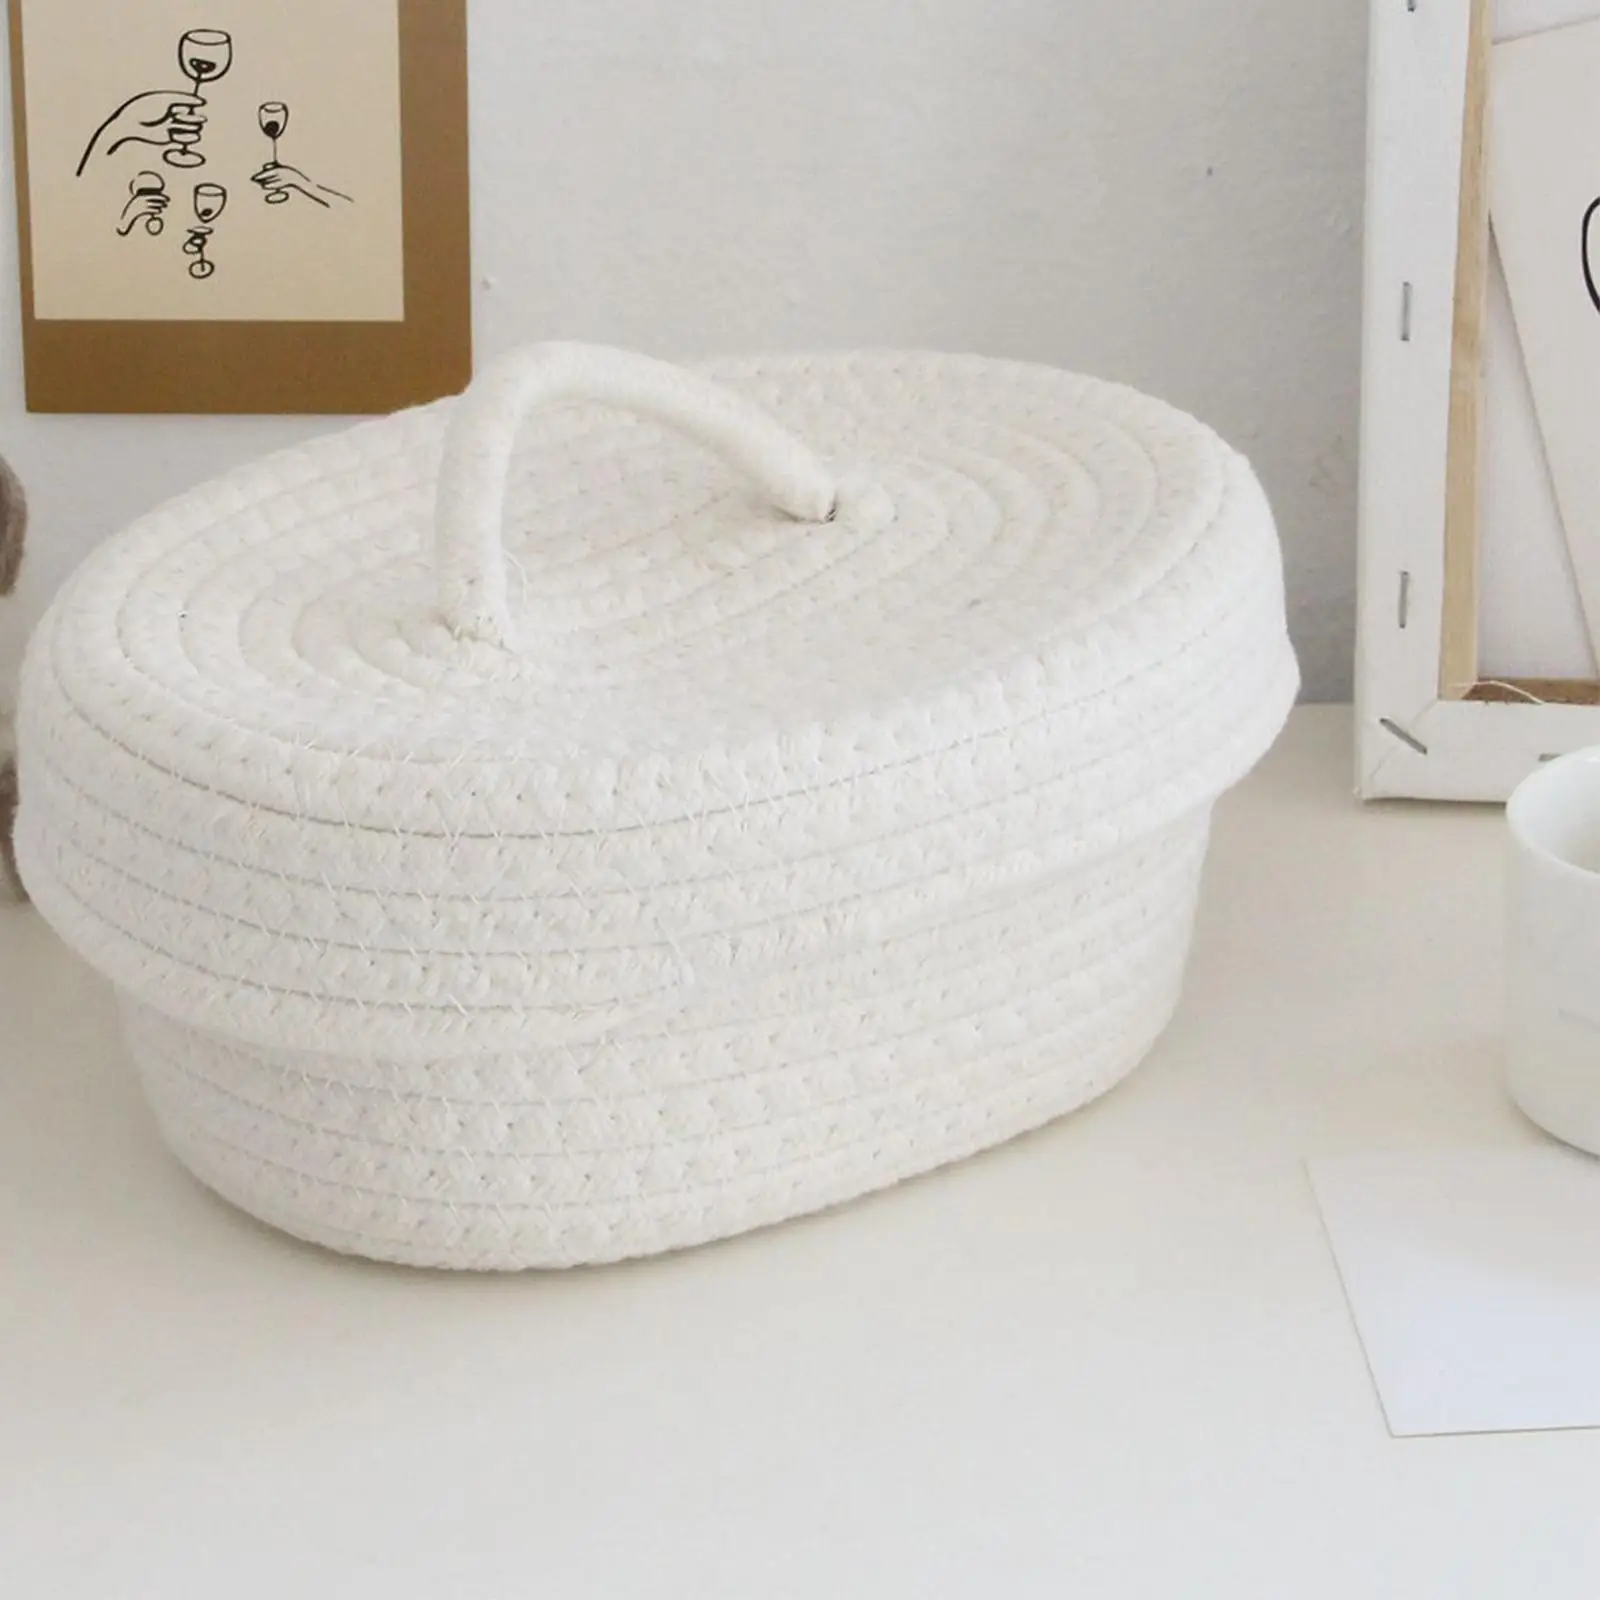 Multifunction Woven Rope Basket with Lid for Sundries Blanket Nursery Kids Toy Cosmetics